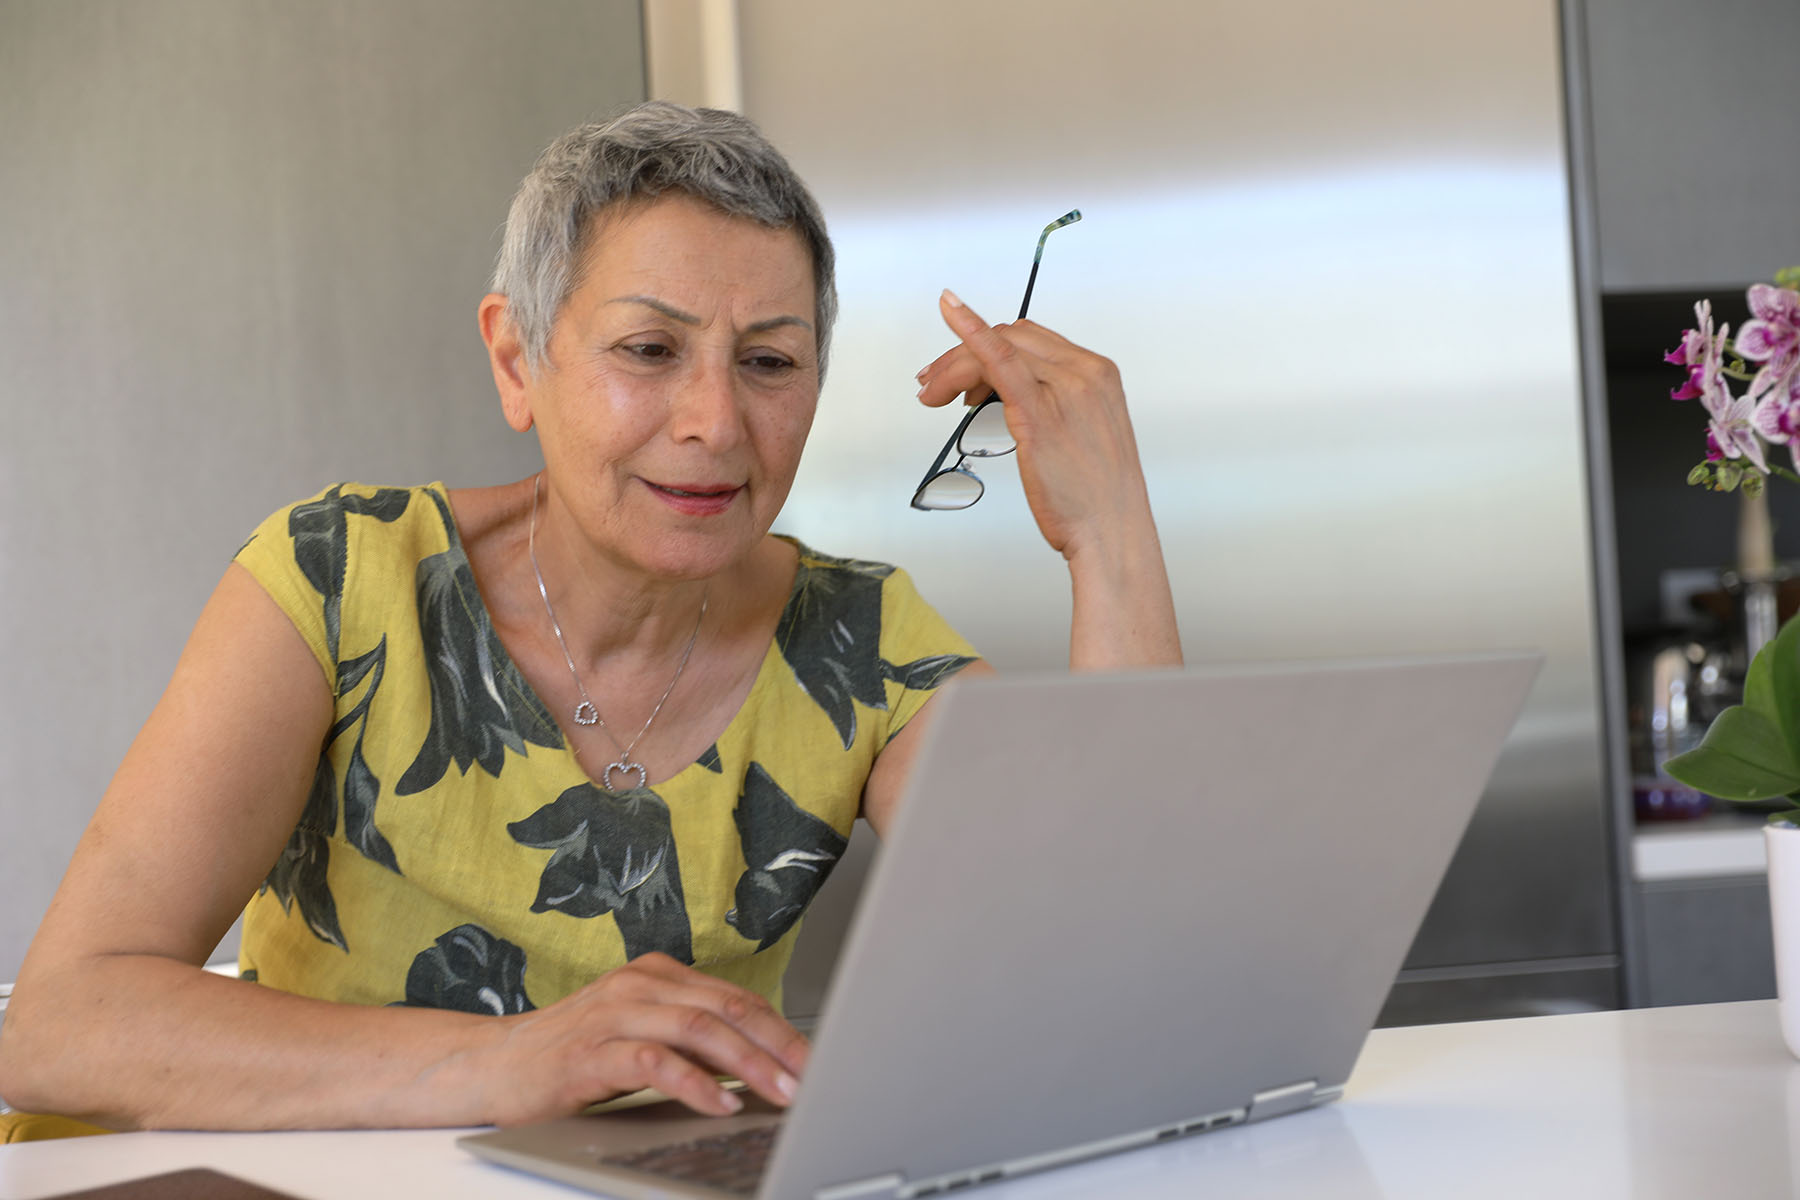 Hispanic woman with short hair looks distressed while researching cancer online